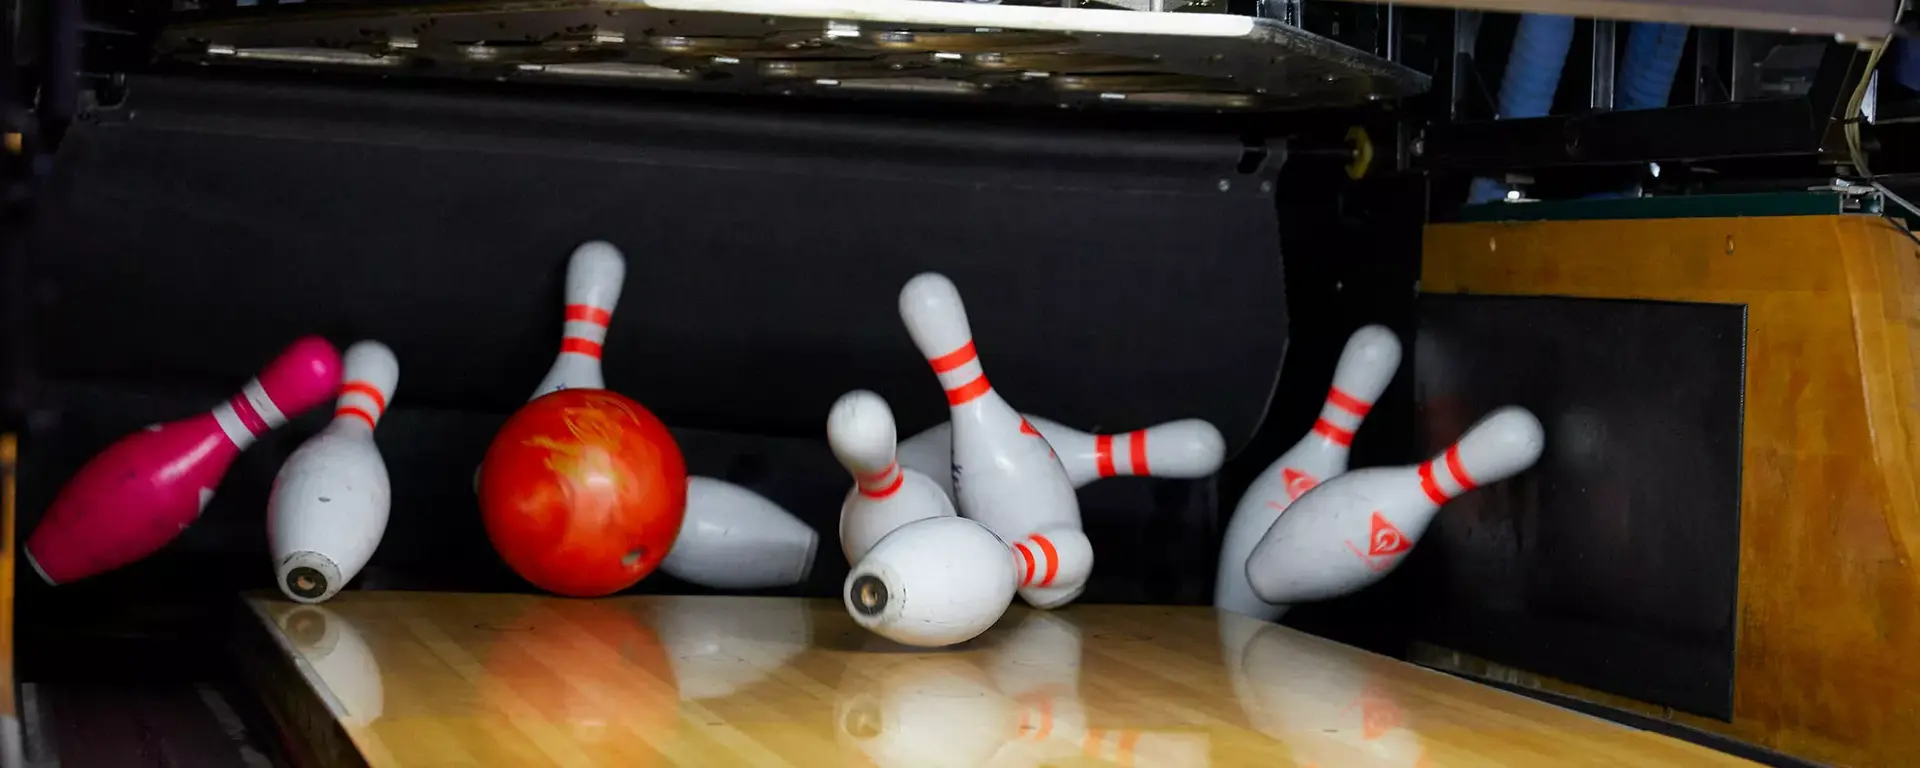 Hollywood bowl bowling discounts and offers